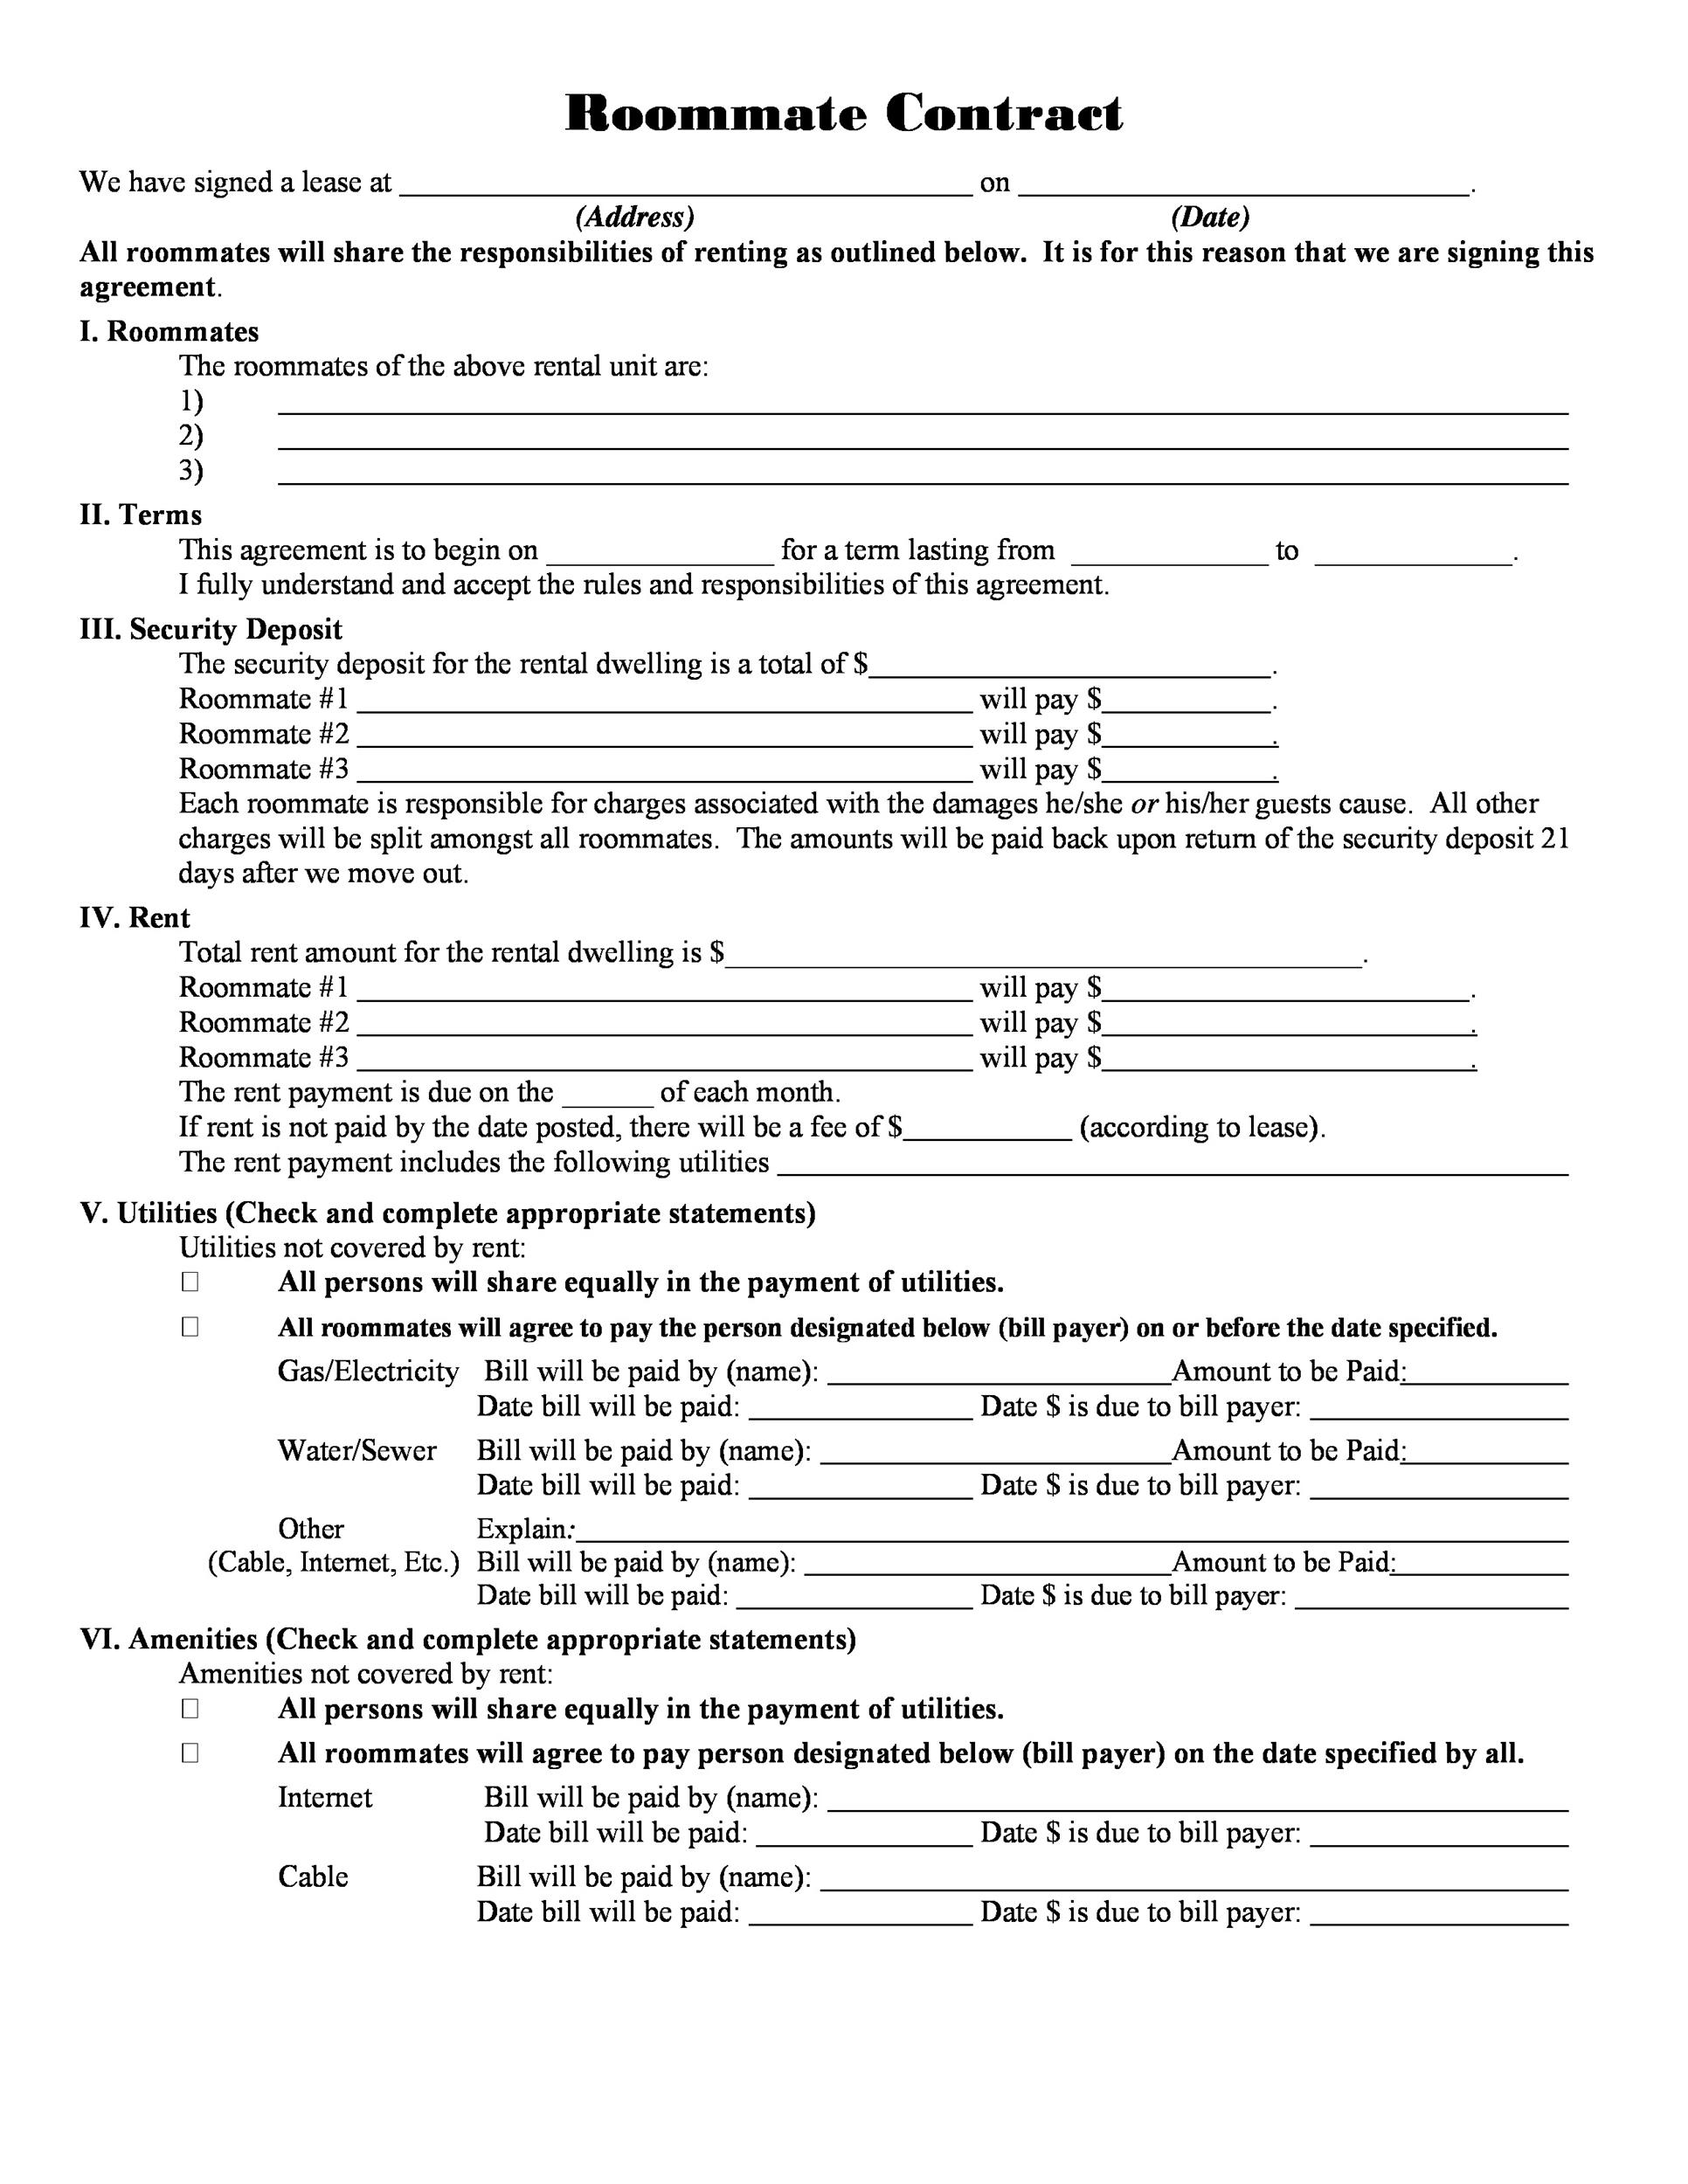 40 Free Roommate Agreement Templates Forms Word PDF 